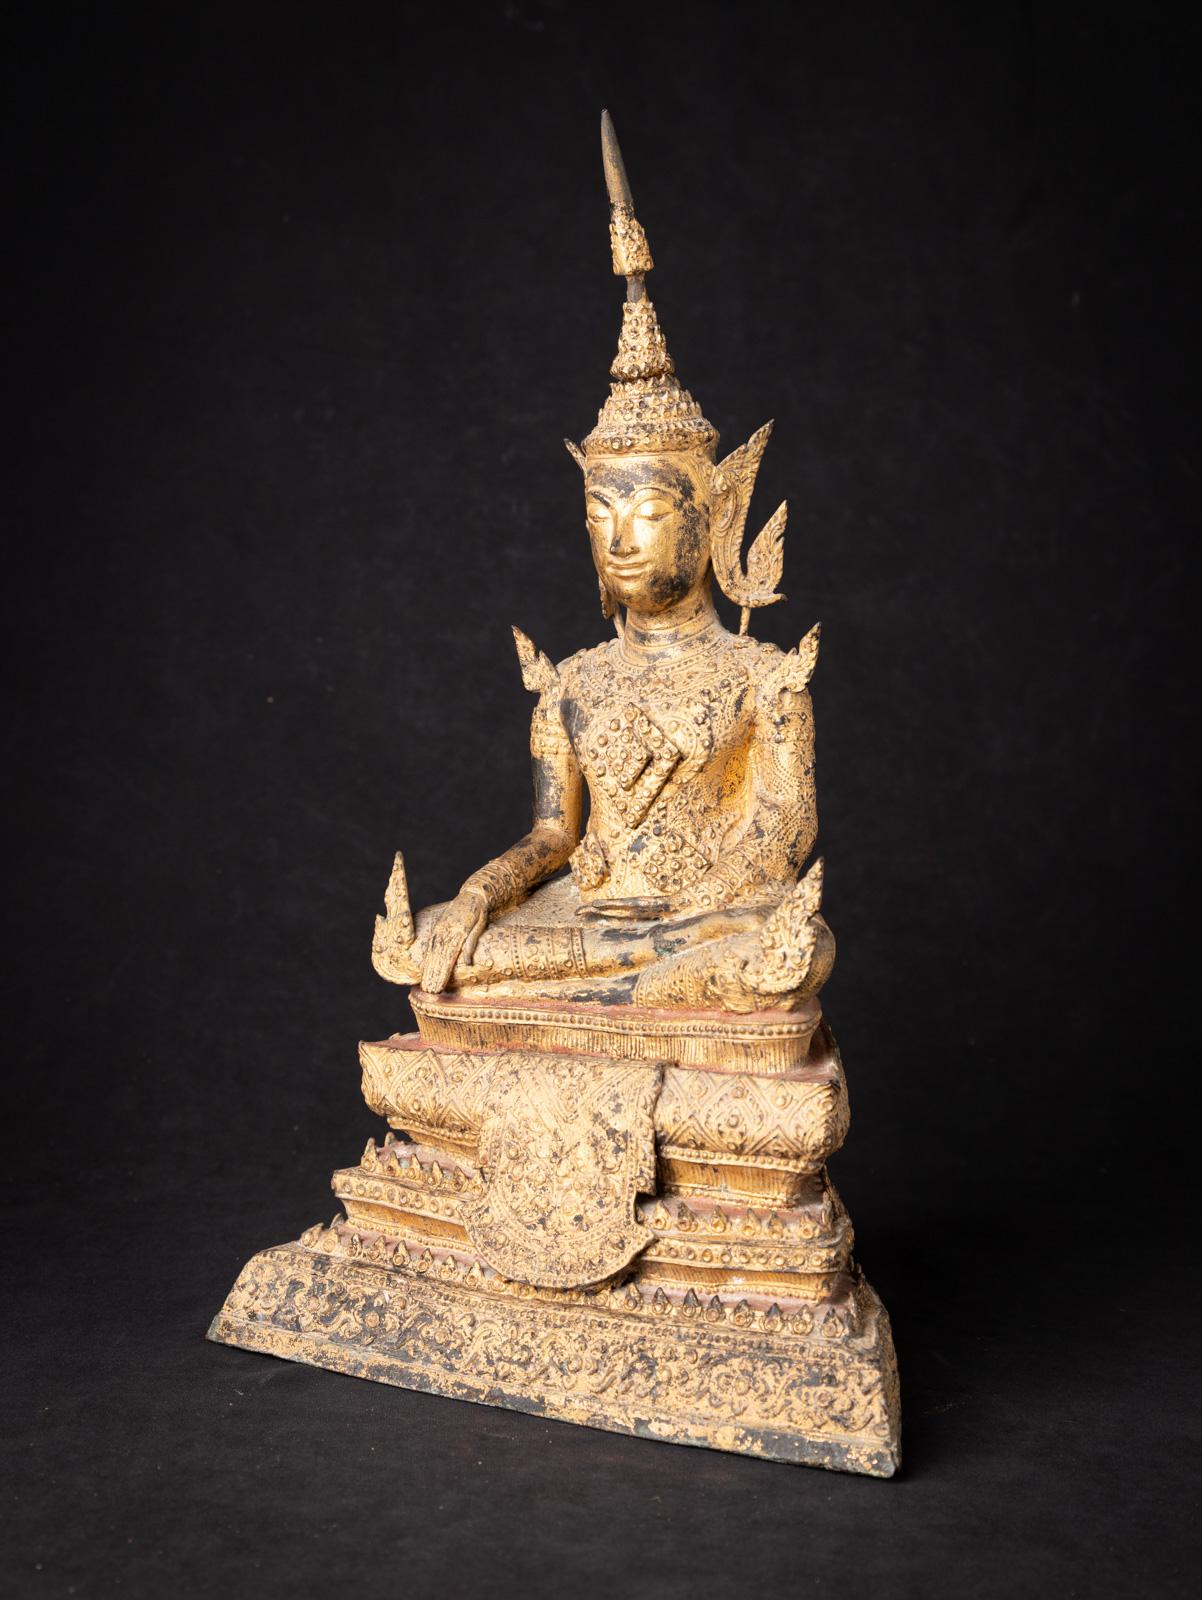 This antique bronze Thai Rattanakosin Buddha is a magnificent representation of Buddhist art and spirituality. Crafted from bronze, it stands at an impressive height of 42.3 cm with dimensions of 26 cm in width and 16 cm in depth. The statue is